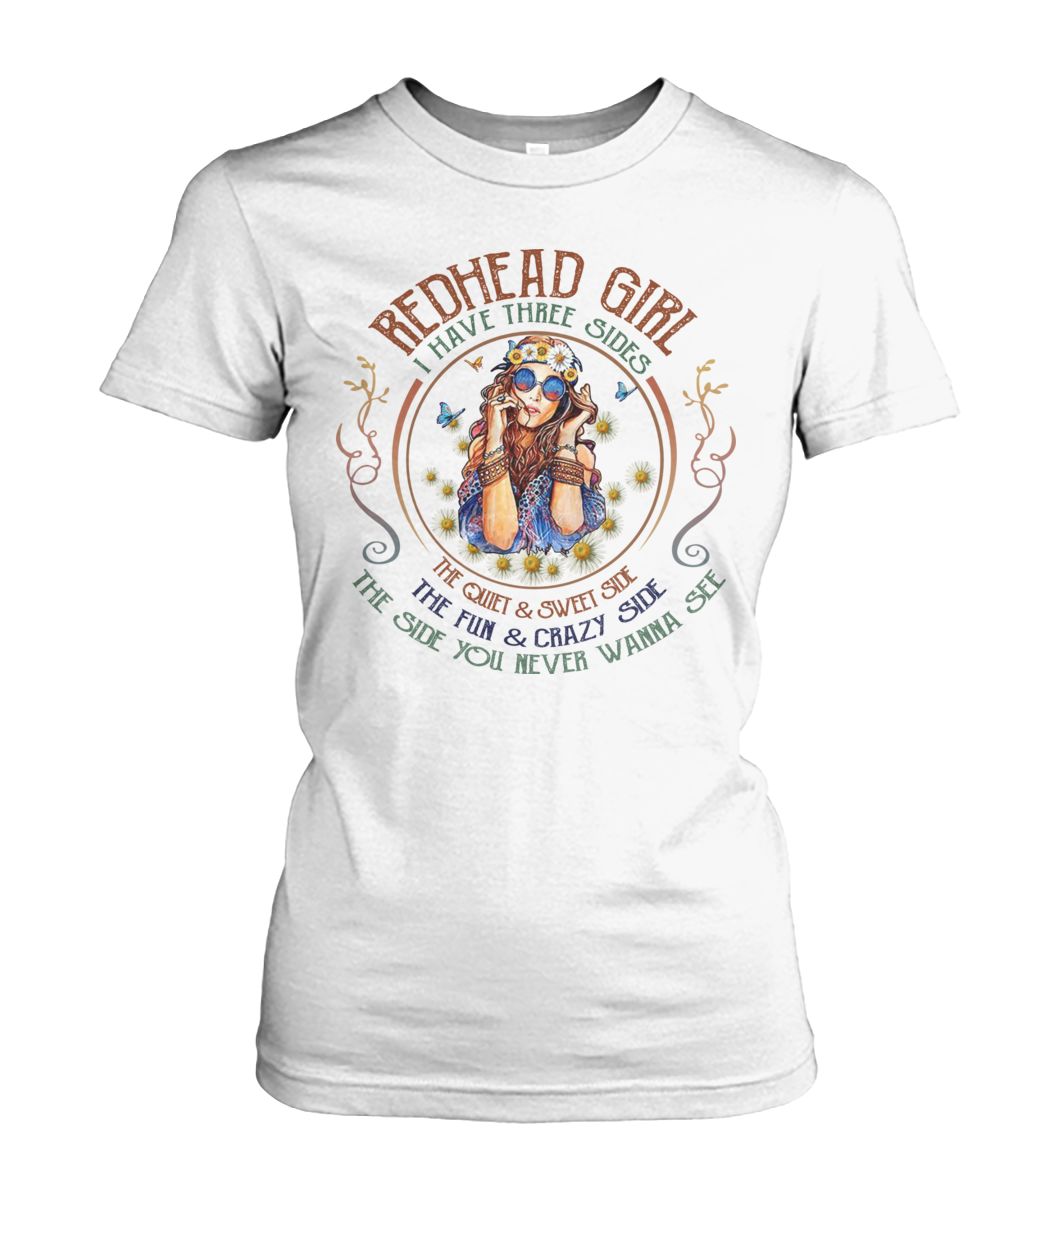 Redhead girl I have three sides the quiet and sweet side women's crew tee